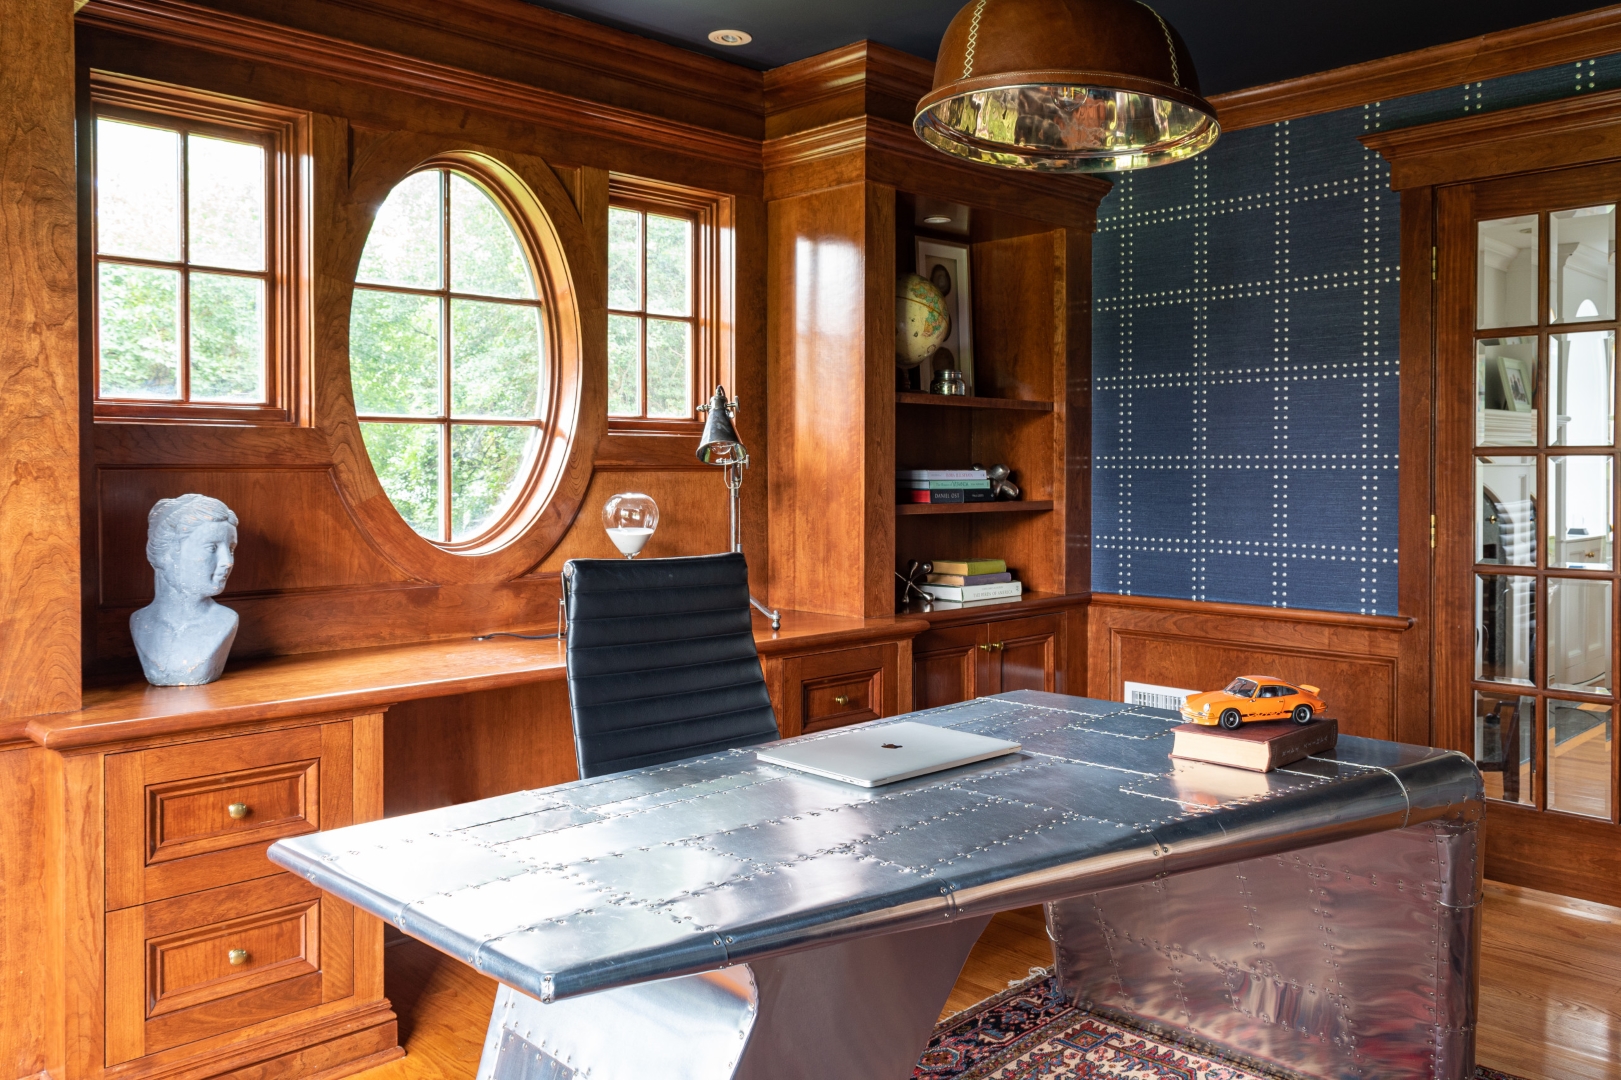 15 Warm and Inviting Traditional Home Office Ideas for Maximum Focus